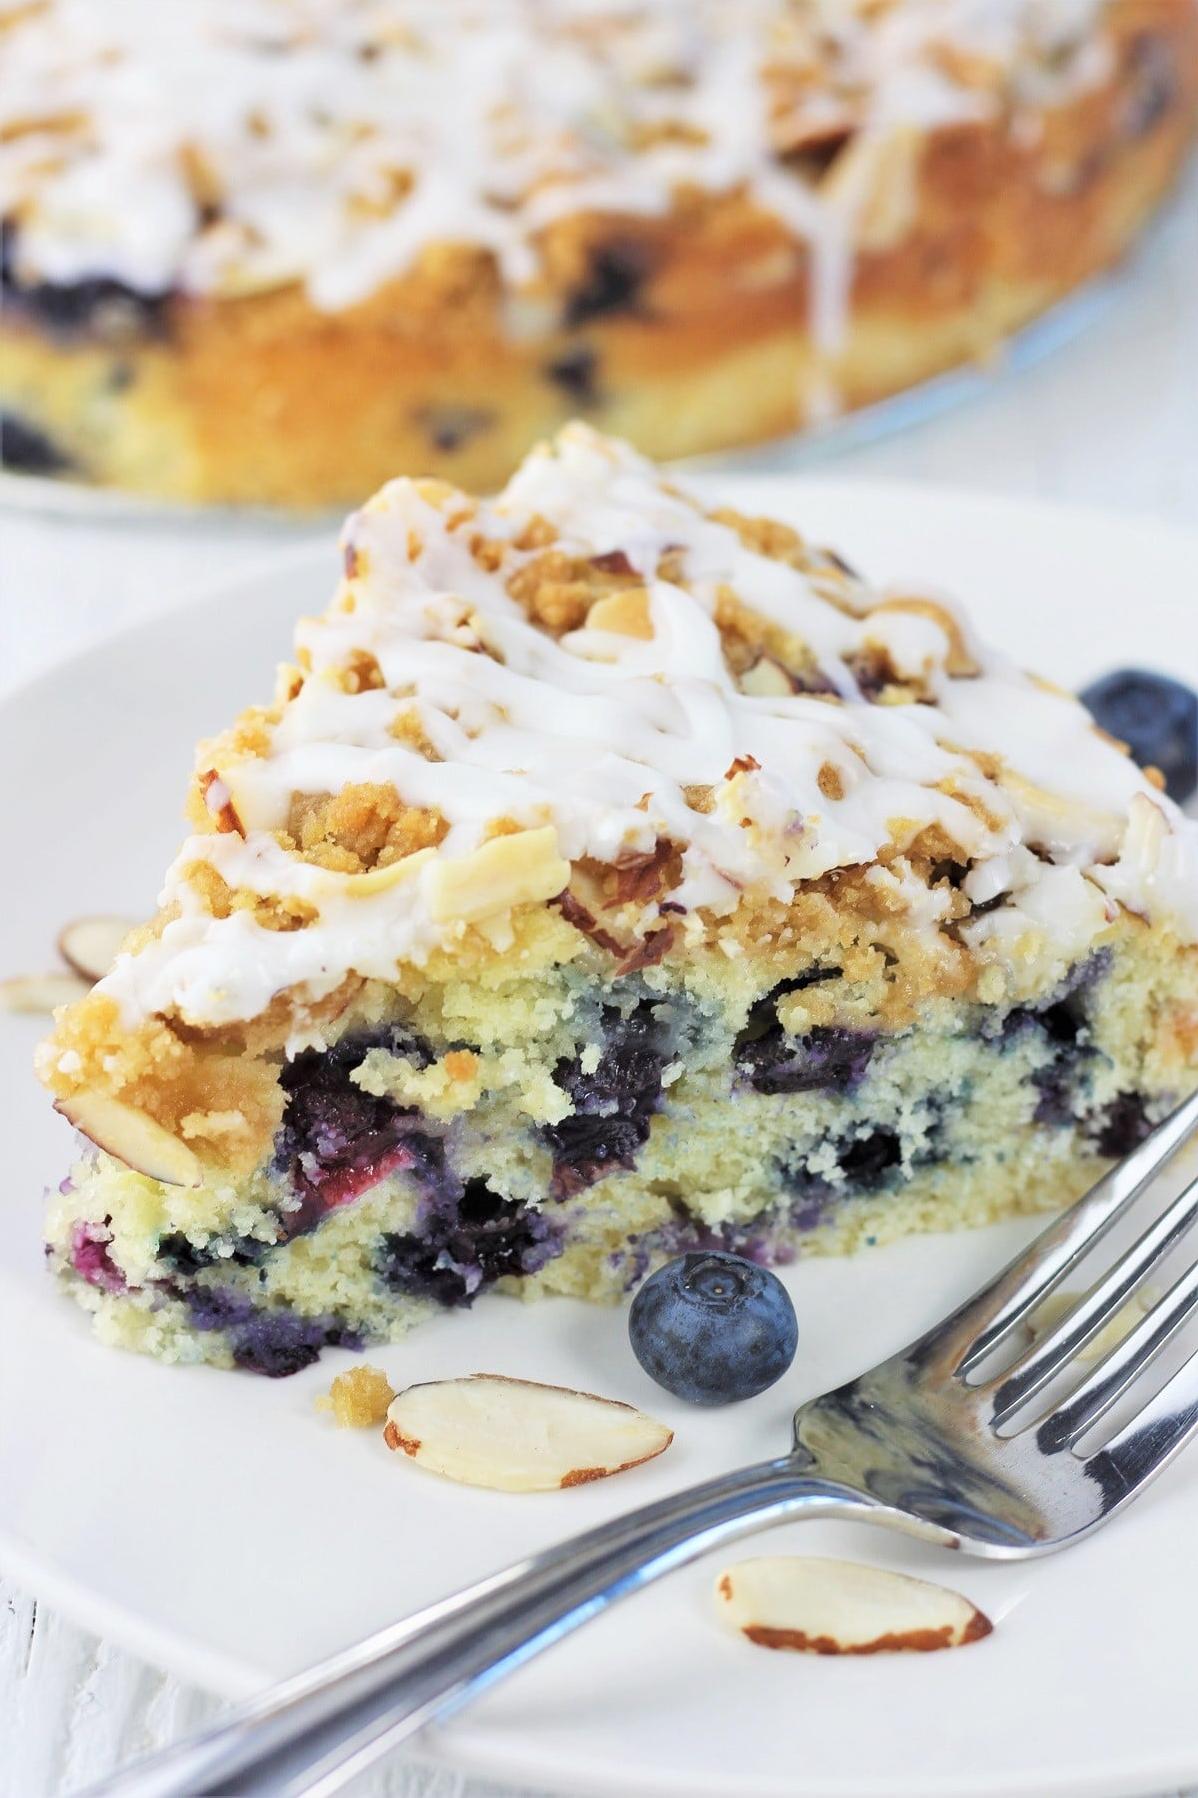  A slice of blueberry almond coffee cake, perfect for a cozy morning at home.